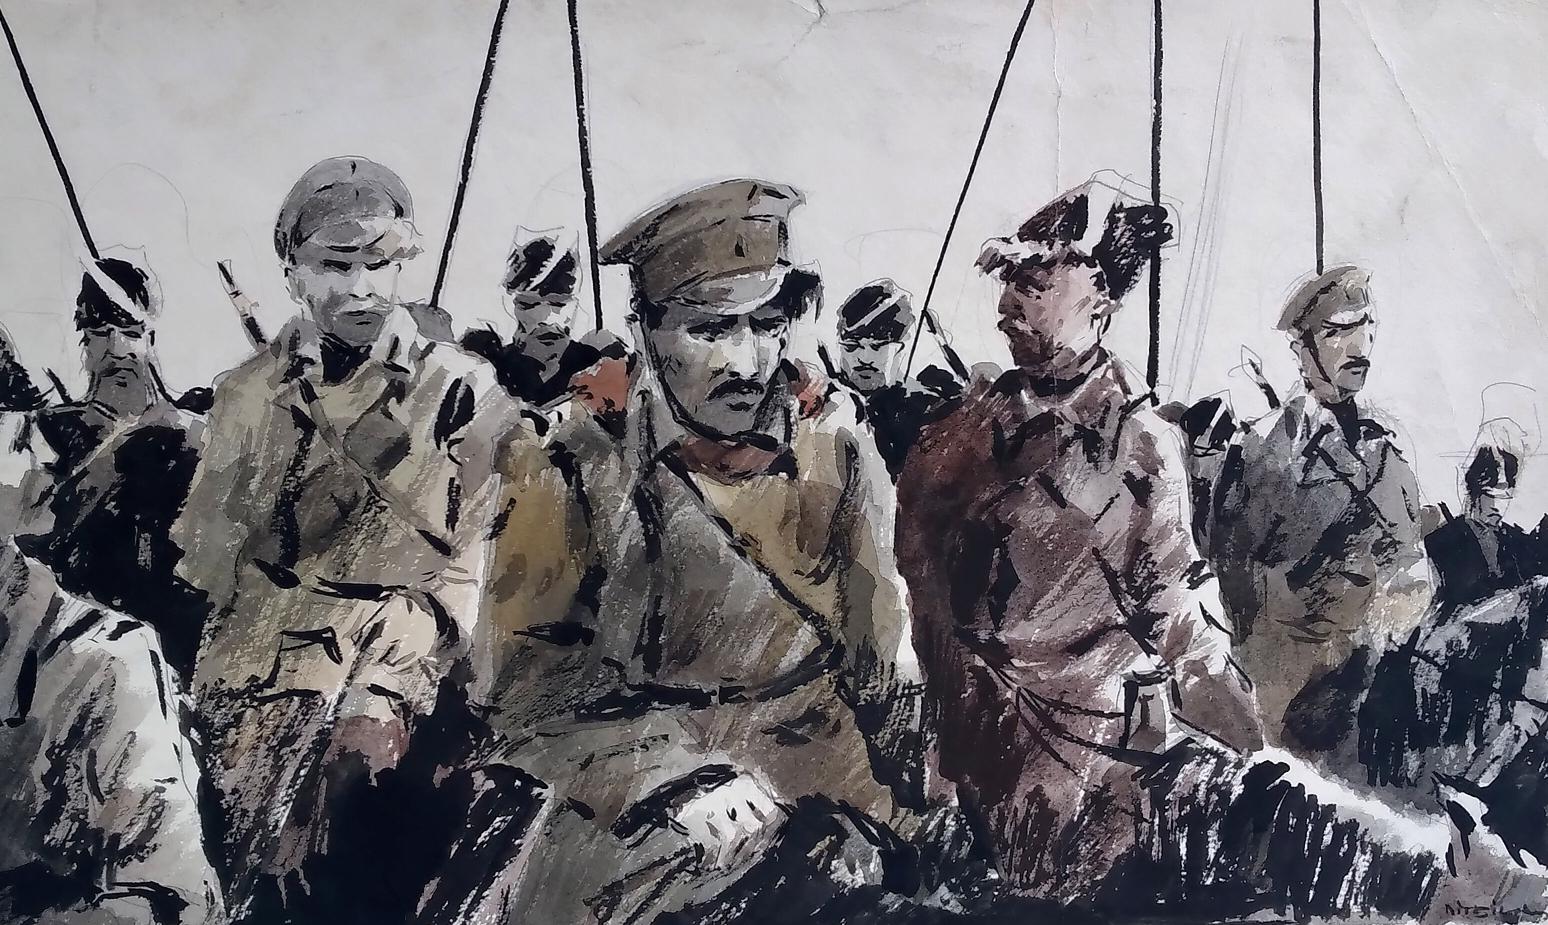 Social realism watercolor painting Soldiers prepare for battle Unknown author